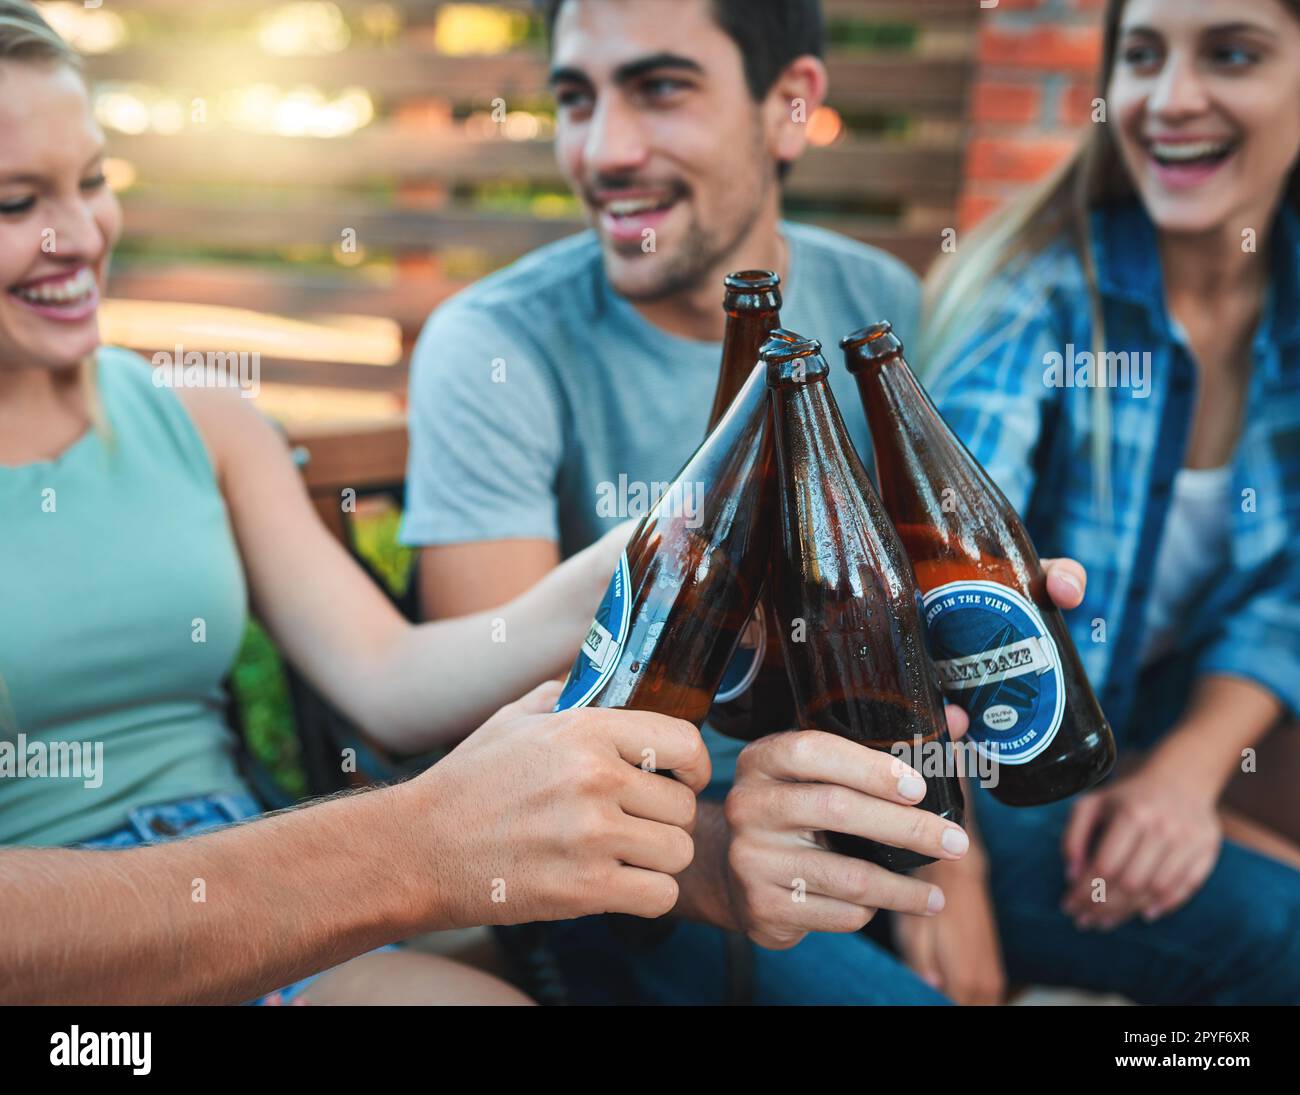 Toast to the best times ever. a group of friends hanging out together and toasting with beers. Stock Photo